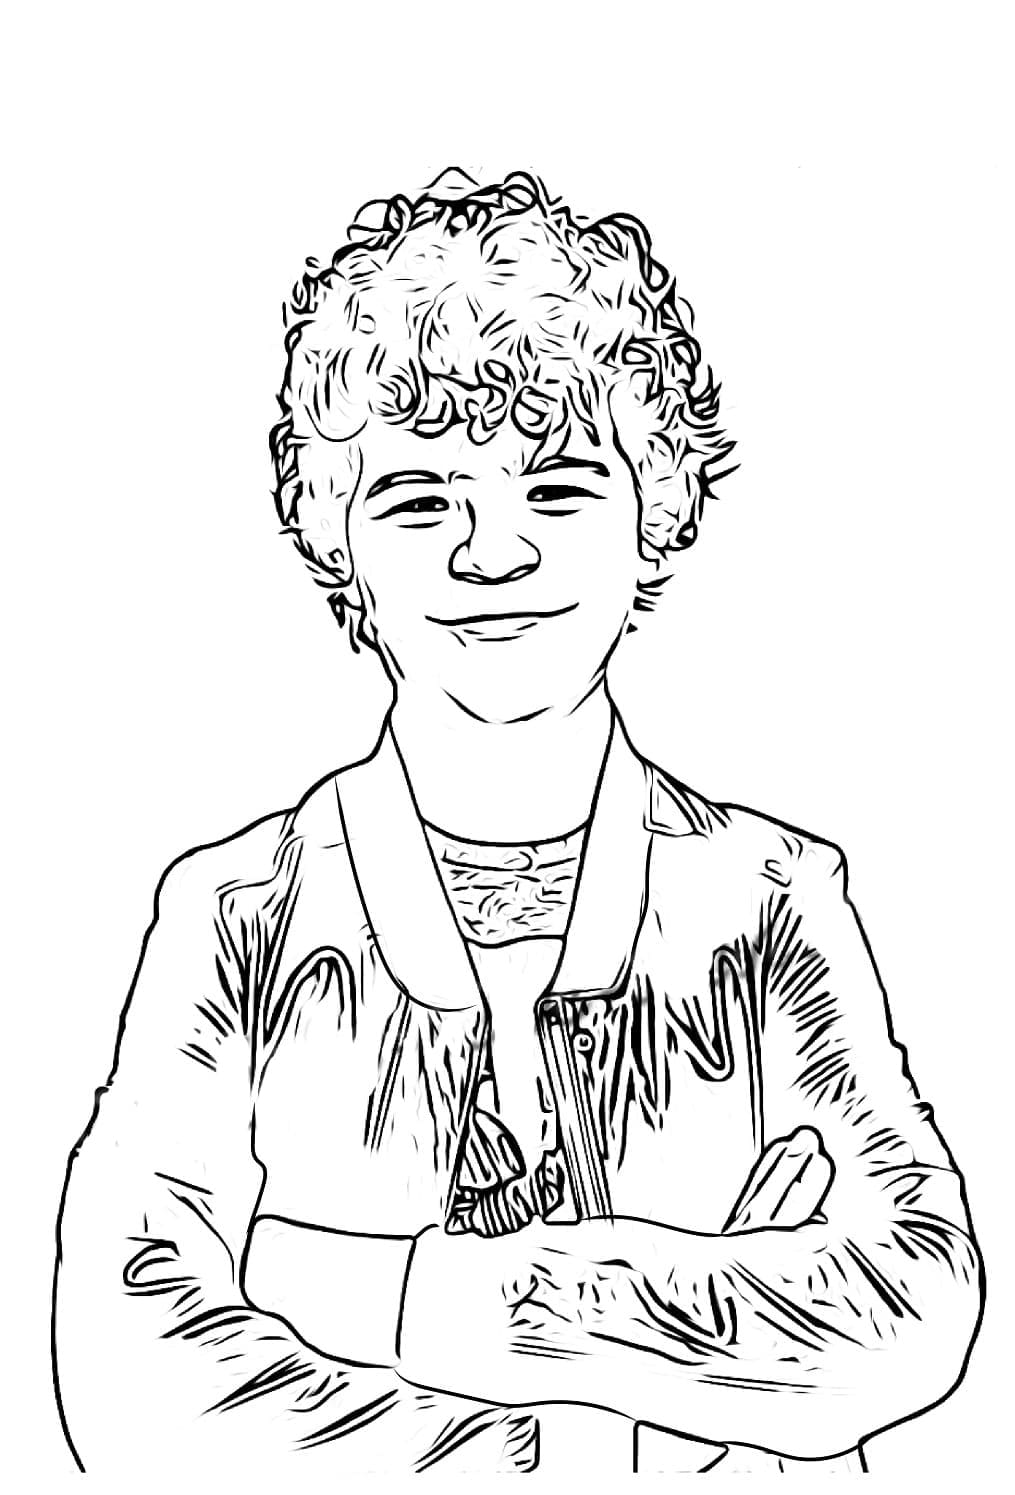 Dustin Henderson coloring page - Download, Print or Color Online for Free